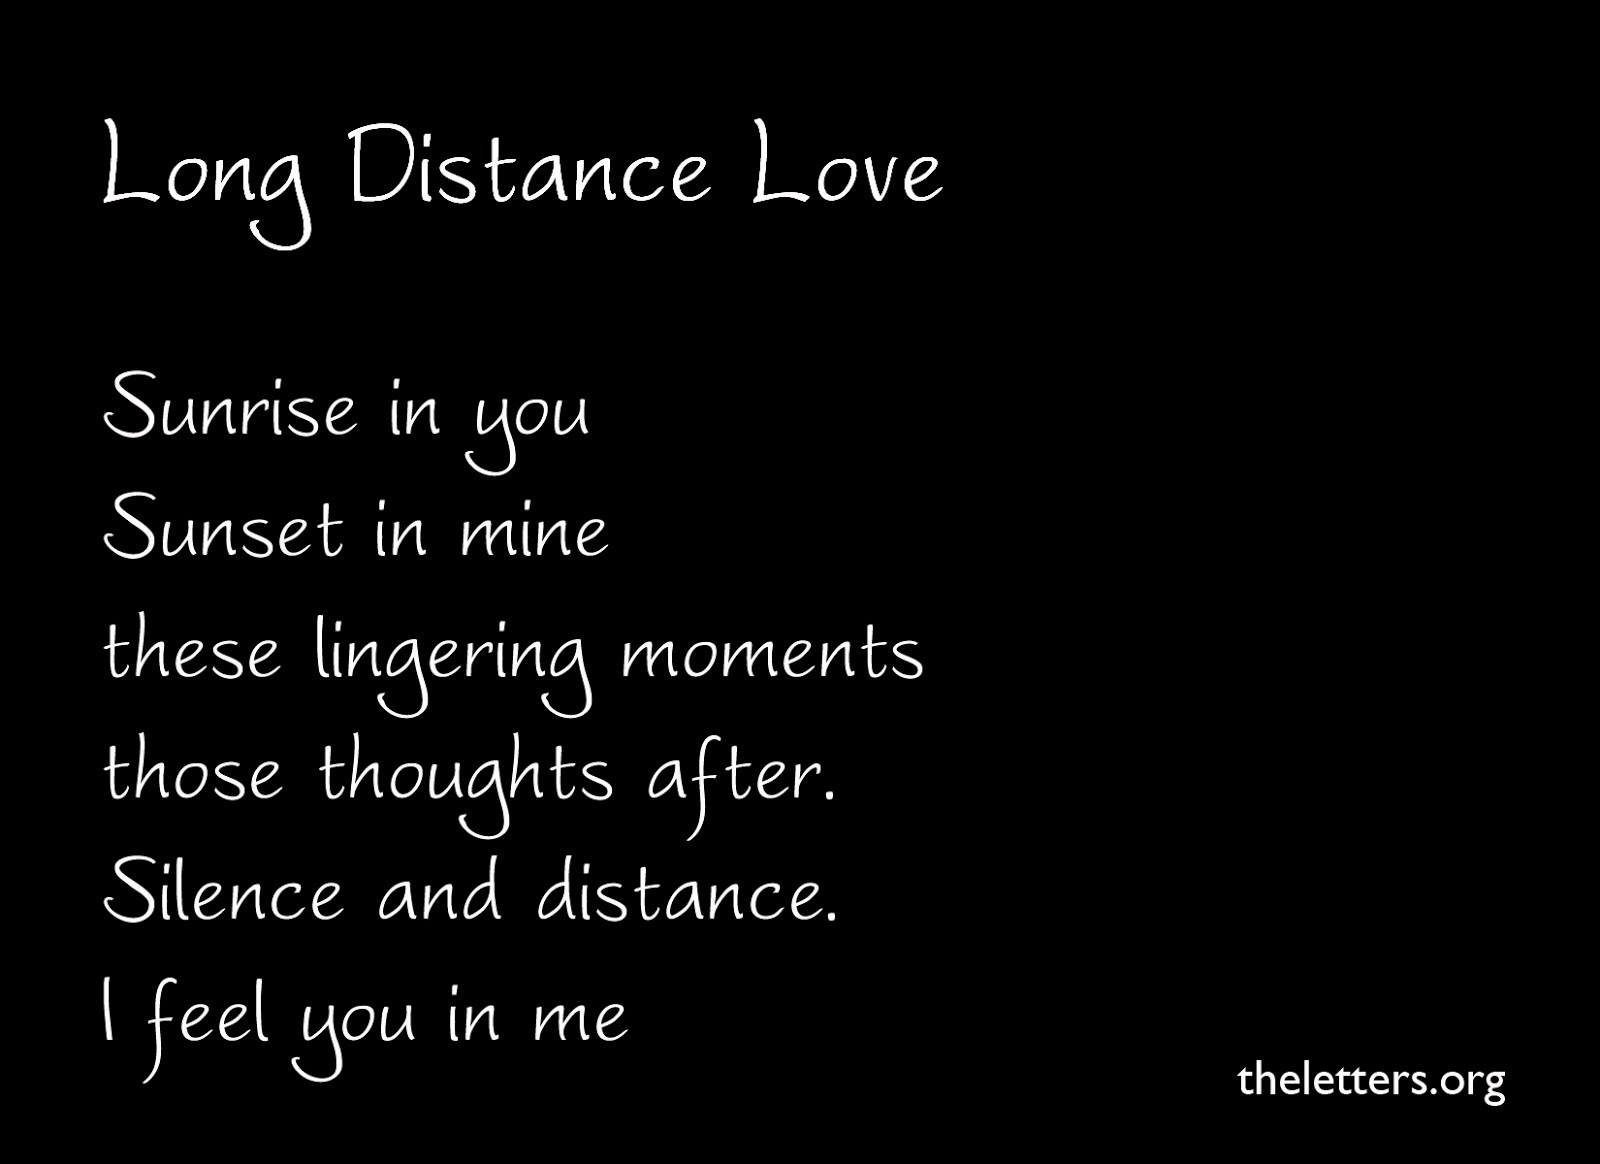 Cute Long Distance Relationship Quotes
 Cute Long Distance Love Quotes For Him QuotesGram